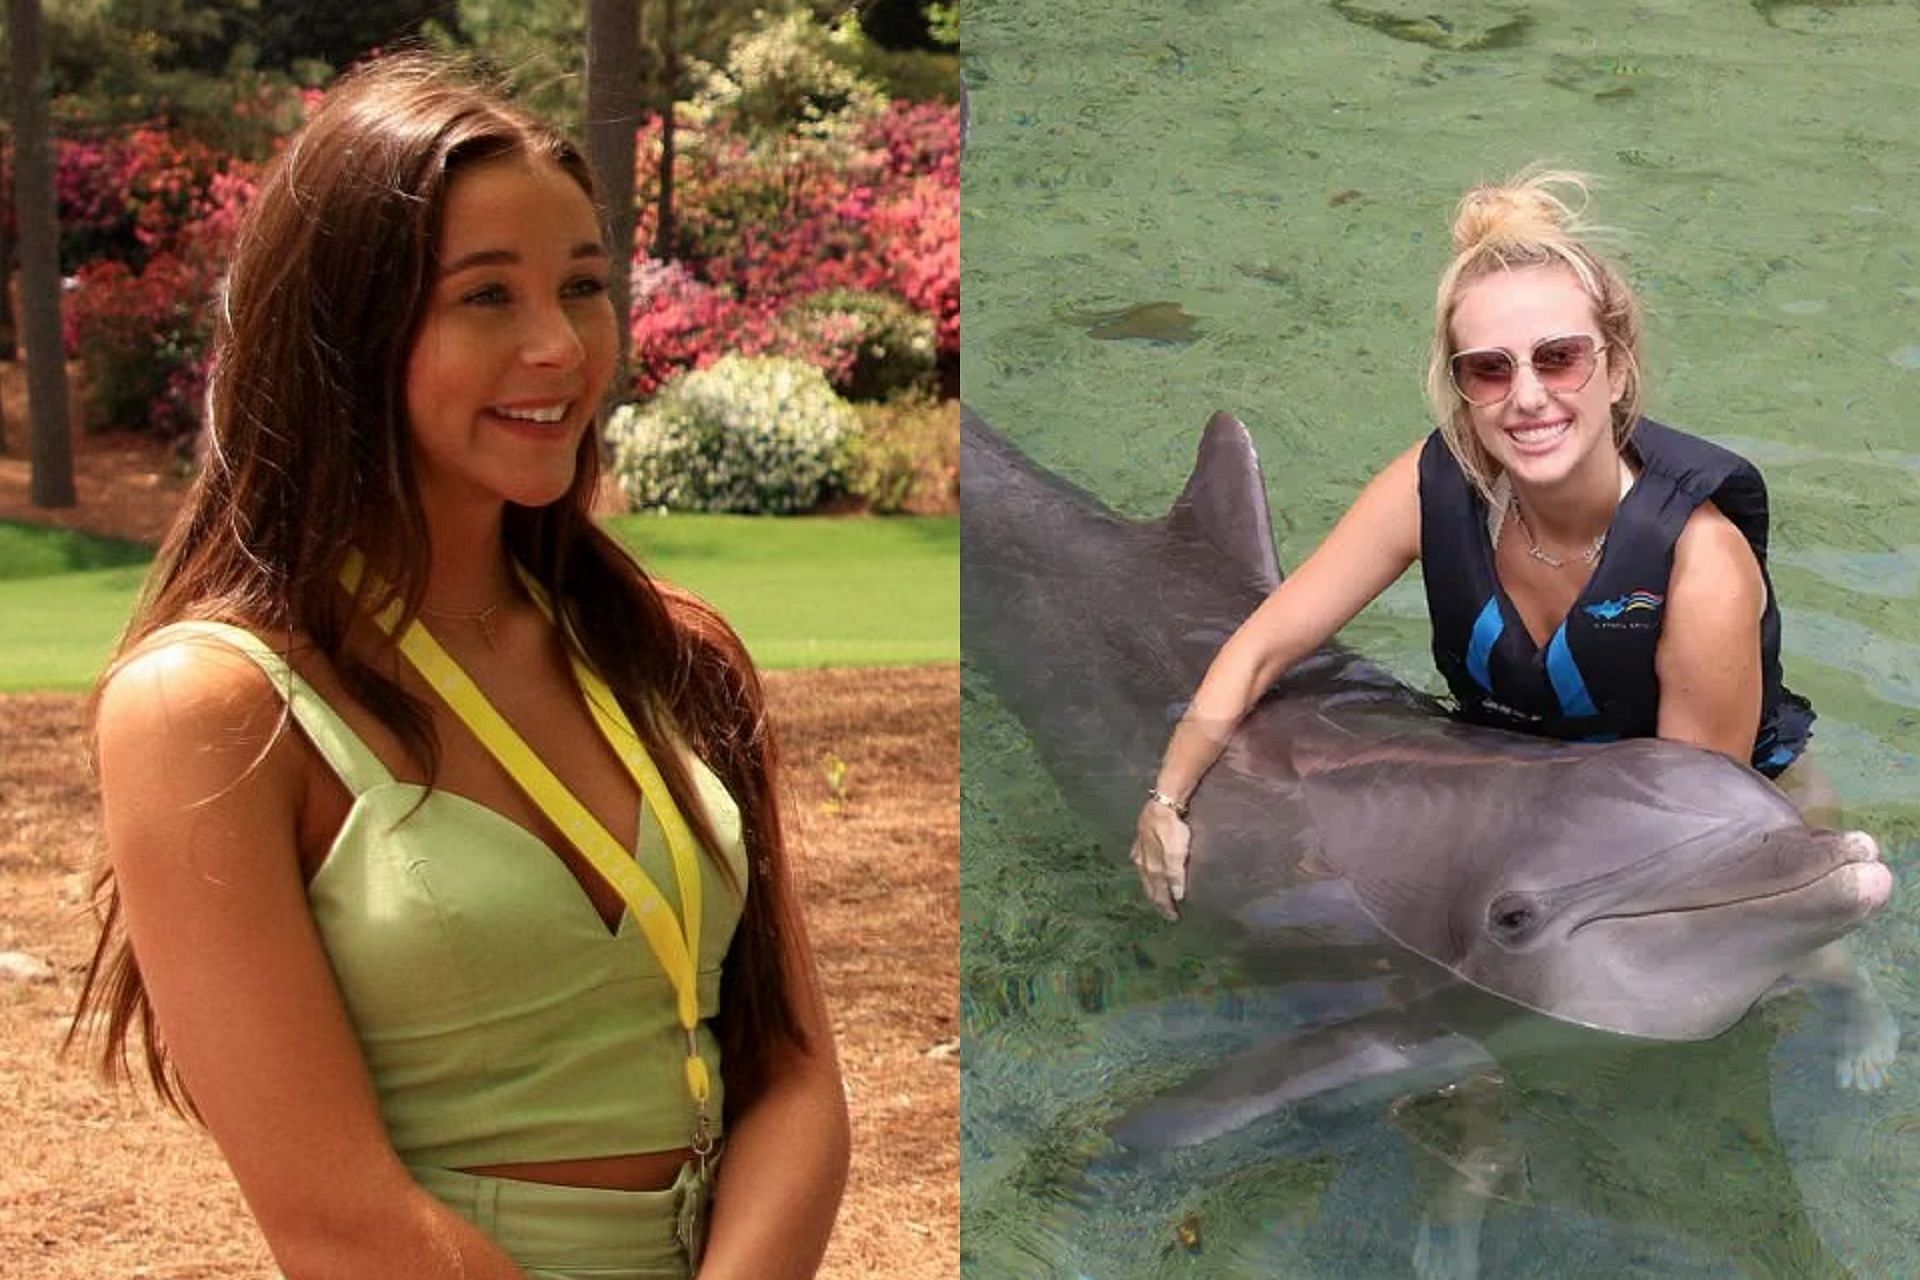 Marissa Lawrence shares pictures of dolphins days after Brittany Mahomes receives outburst from fans, PETA